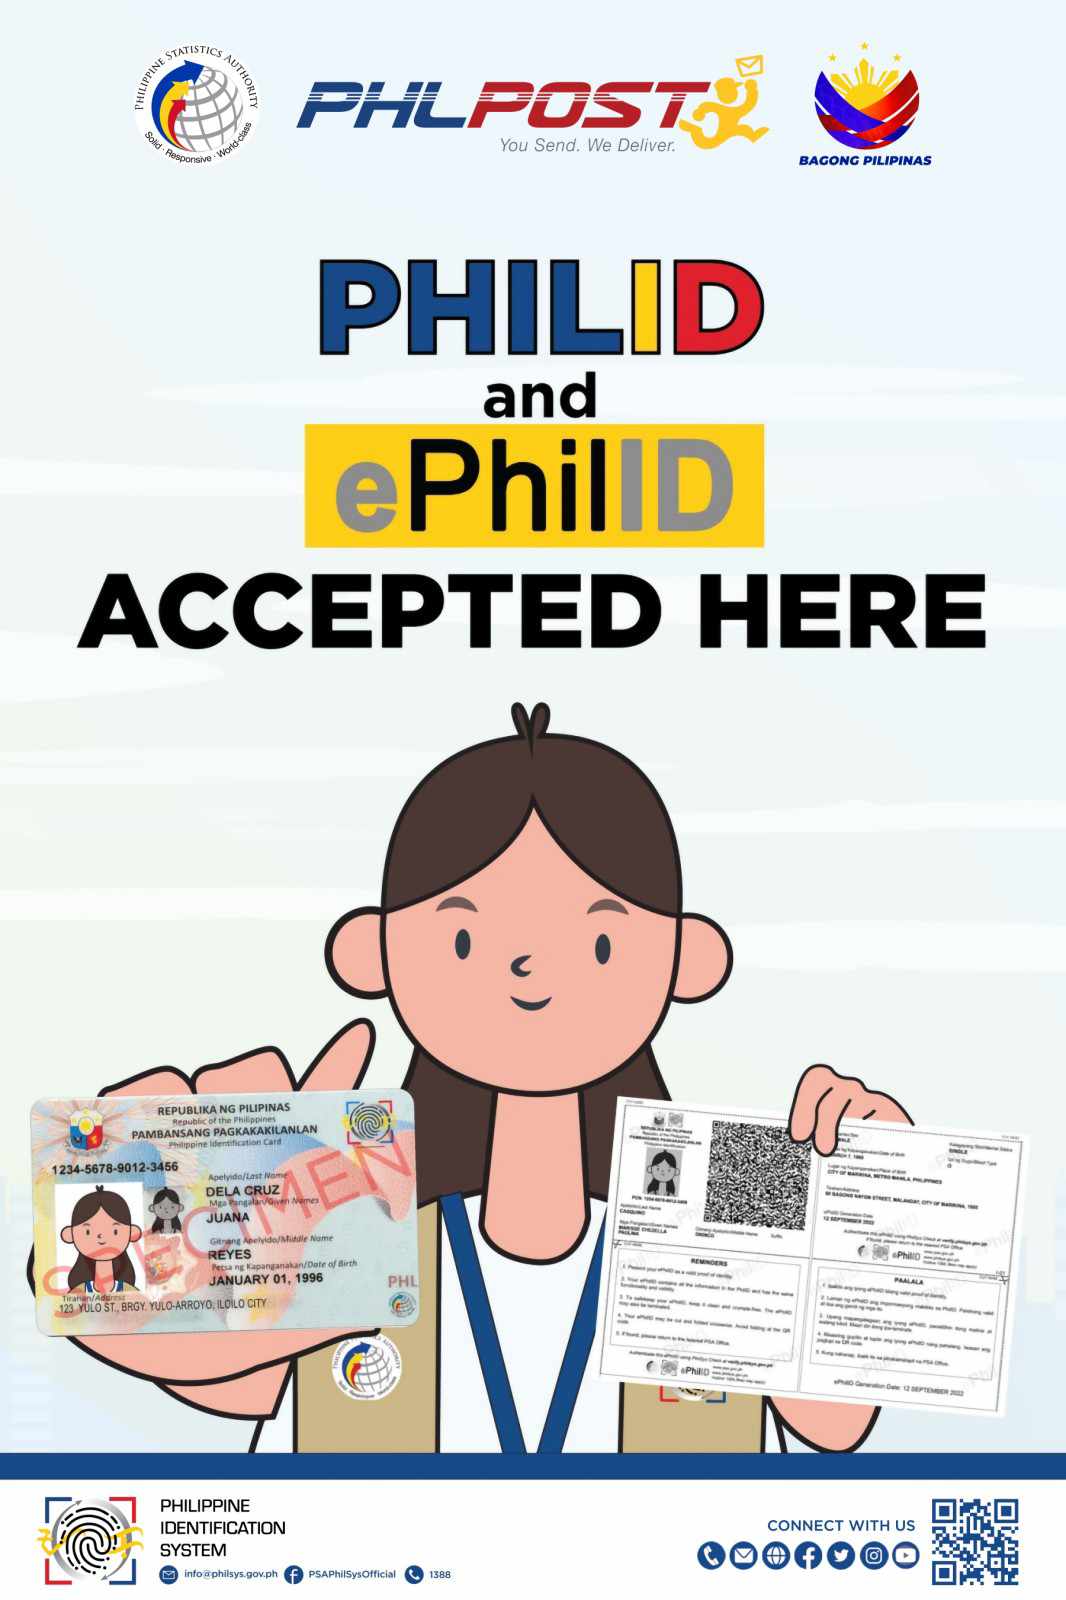 PhilID and ePhilID cards are accepted when transacting with all Post Offices Nationwide